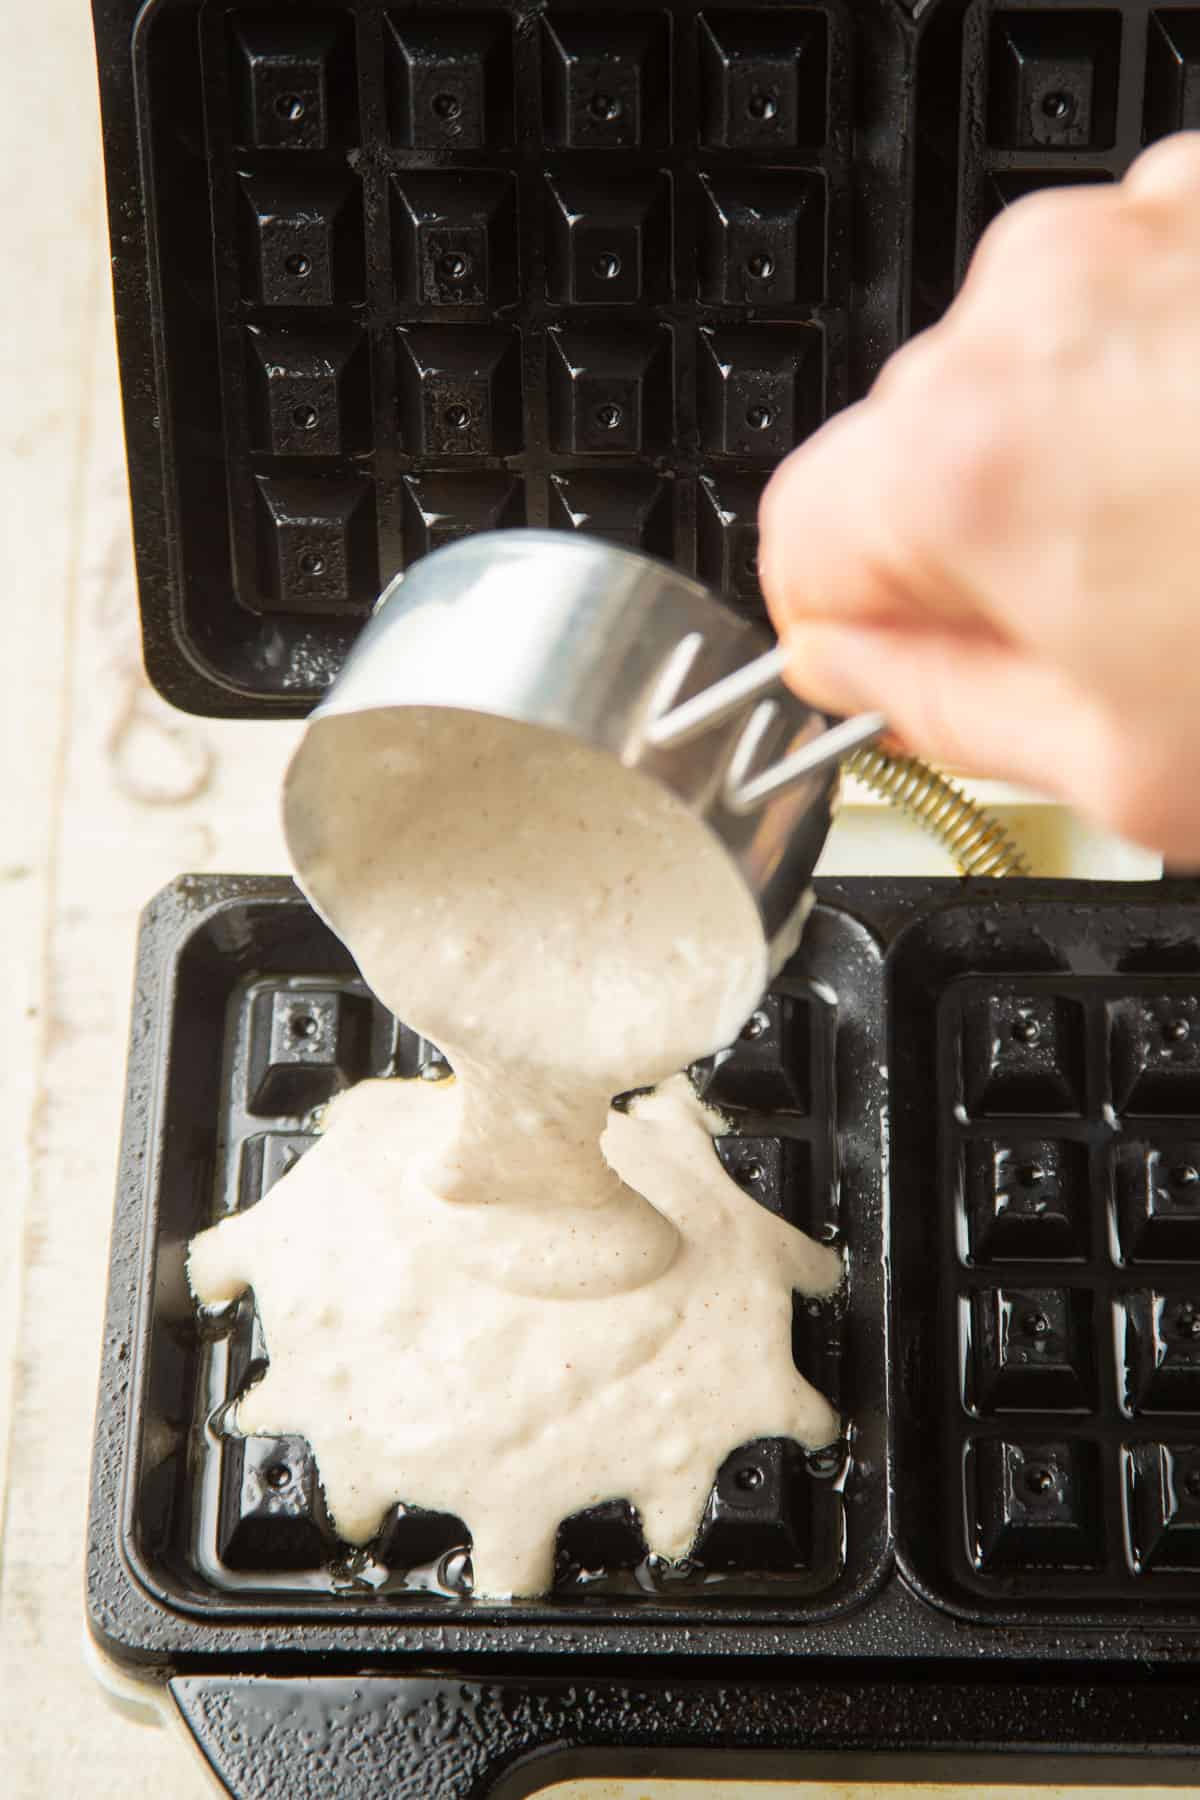 Hand pouring waffles batter into a waffle iron.